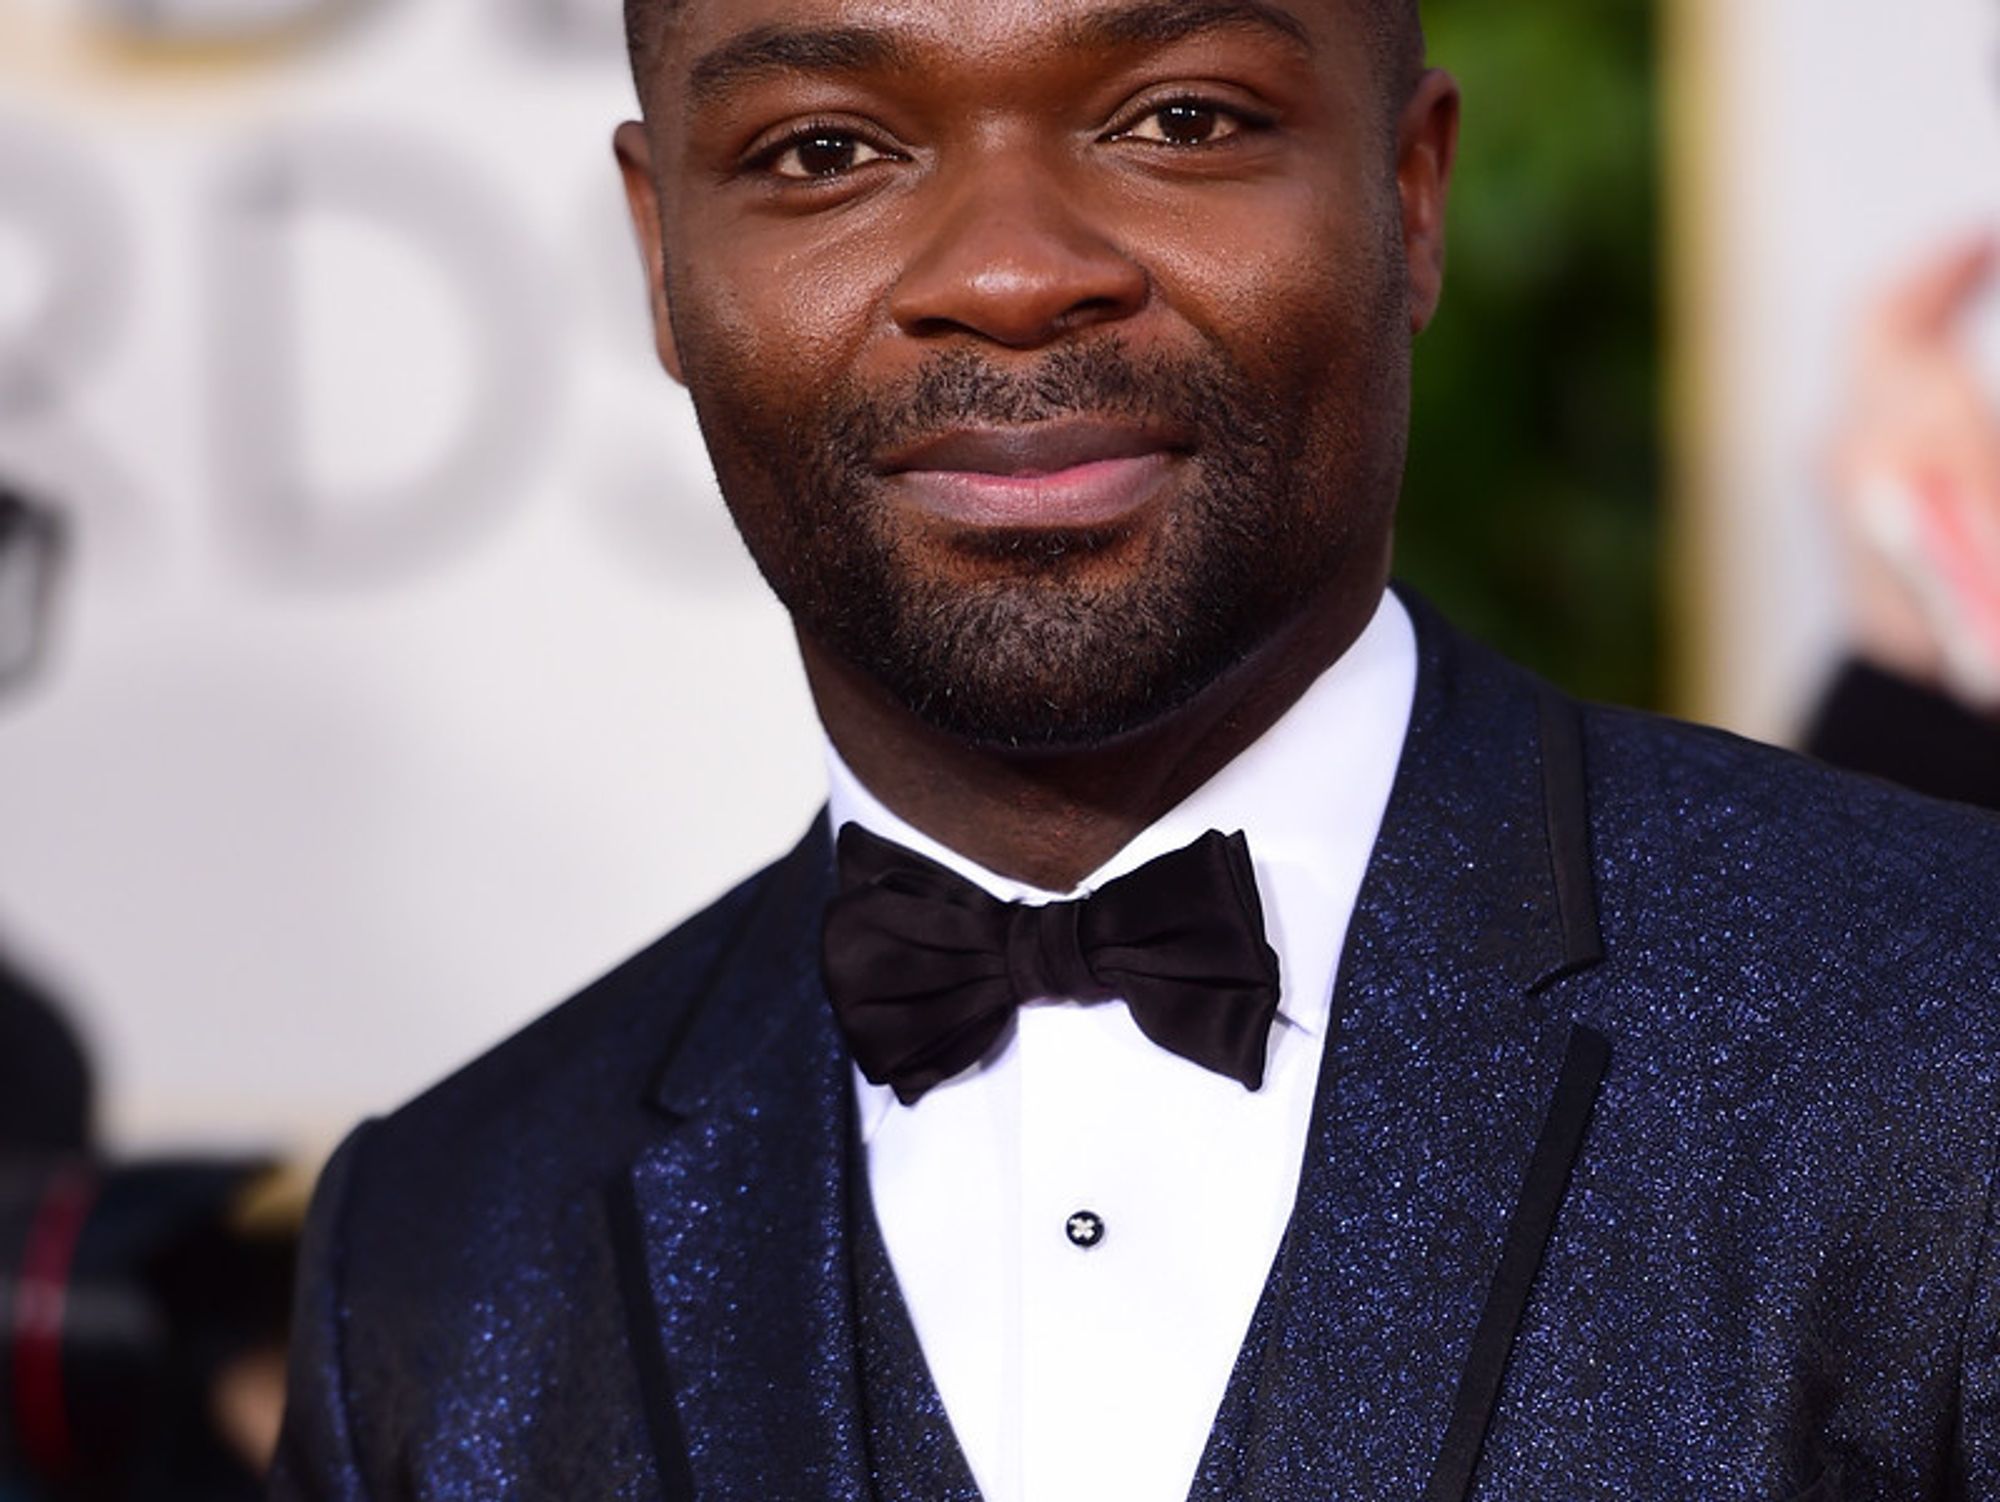 David Oyelowo Will Star as US President In an Upcoming Drama Series from Showtime